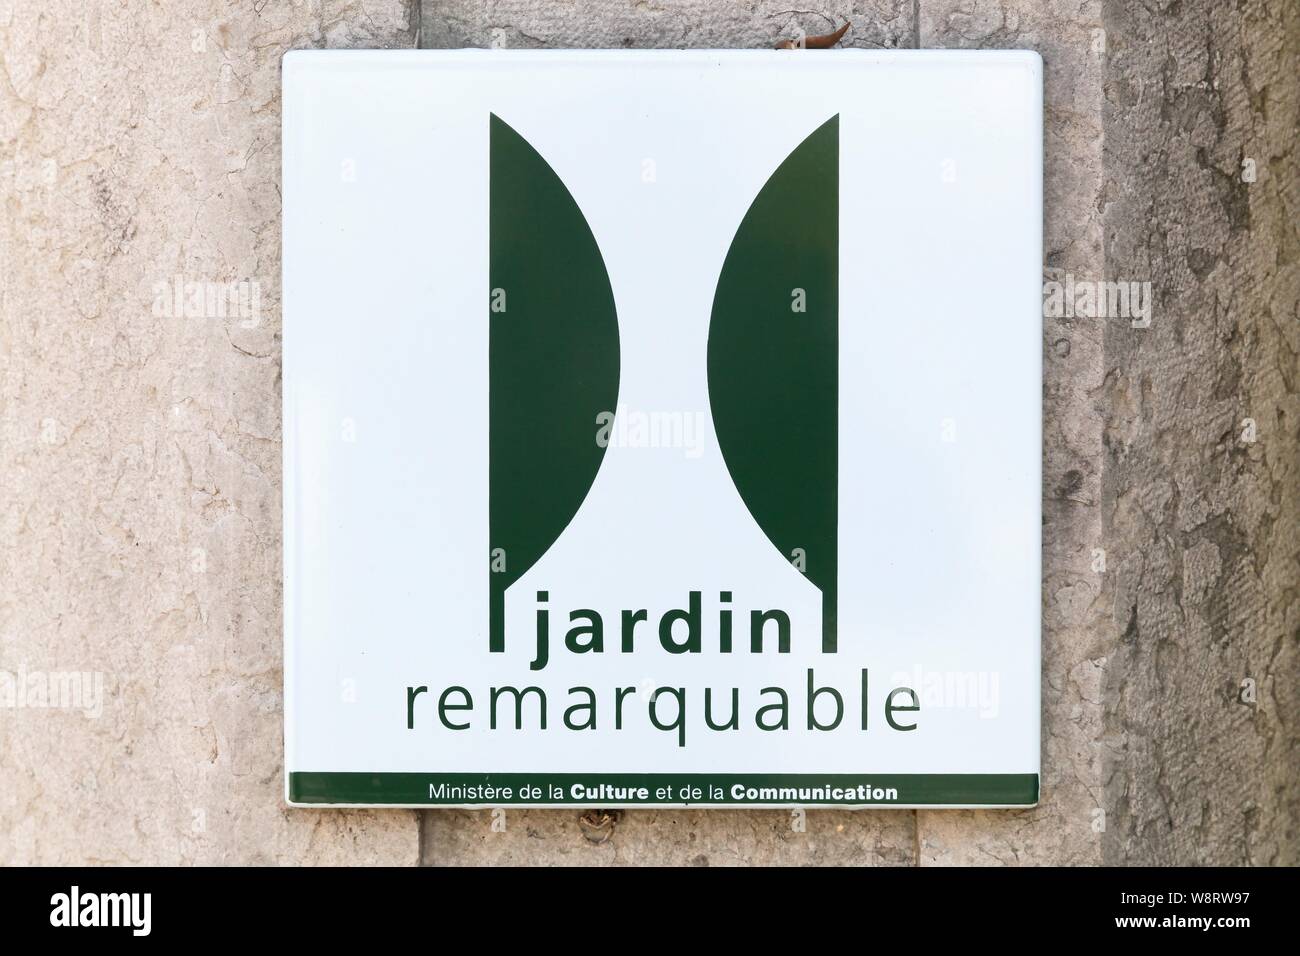 Lyon, France - October 20, 2016: The Remarkable Gardens of France label. Sign indicating one of the remarkable gardens of France Stock Photo